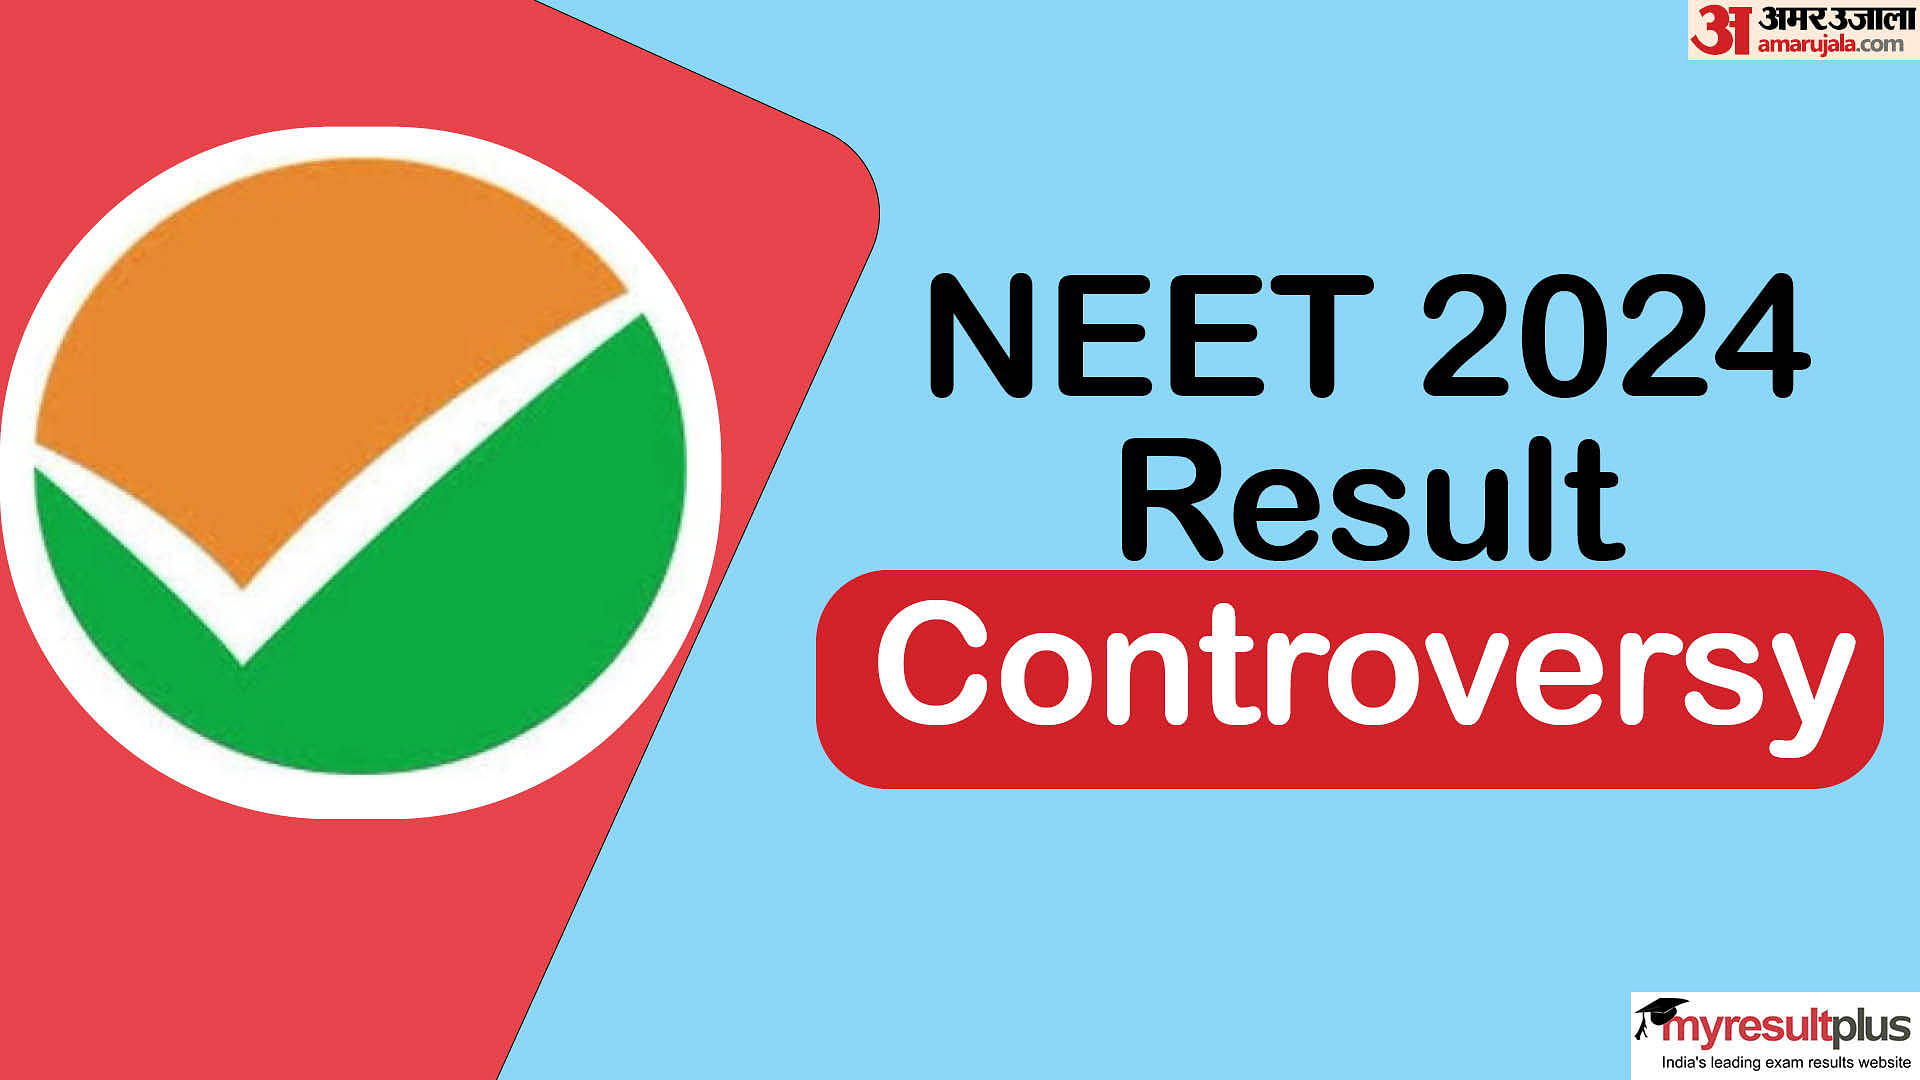 NEET row: Sibal demands probe by SC-appointed officials, Read details here